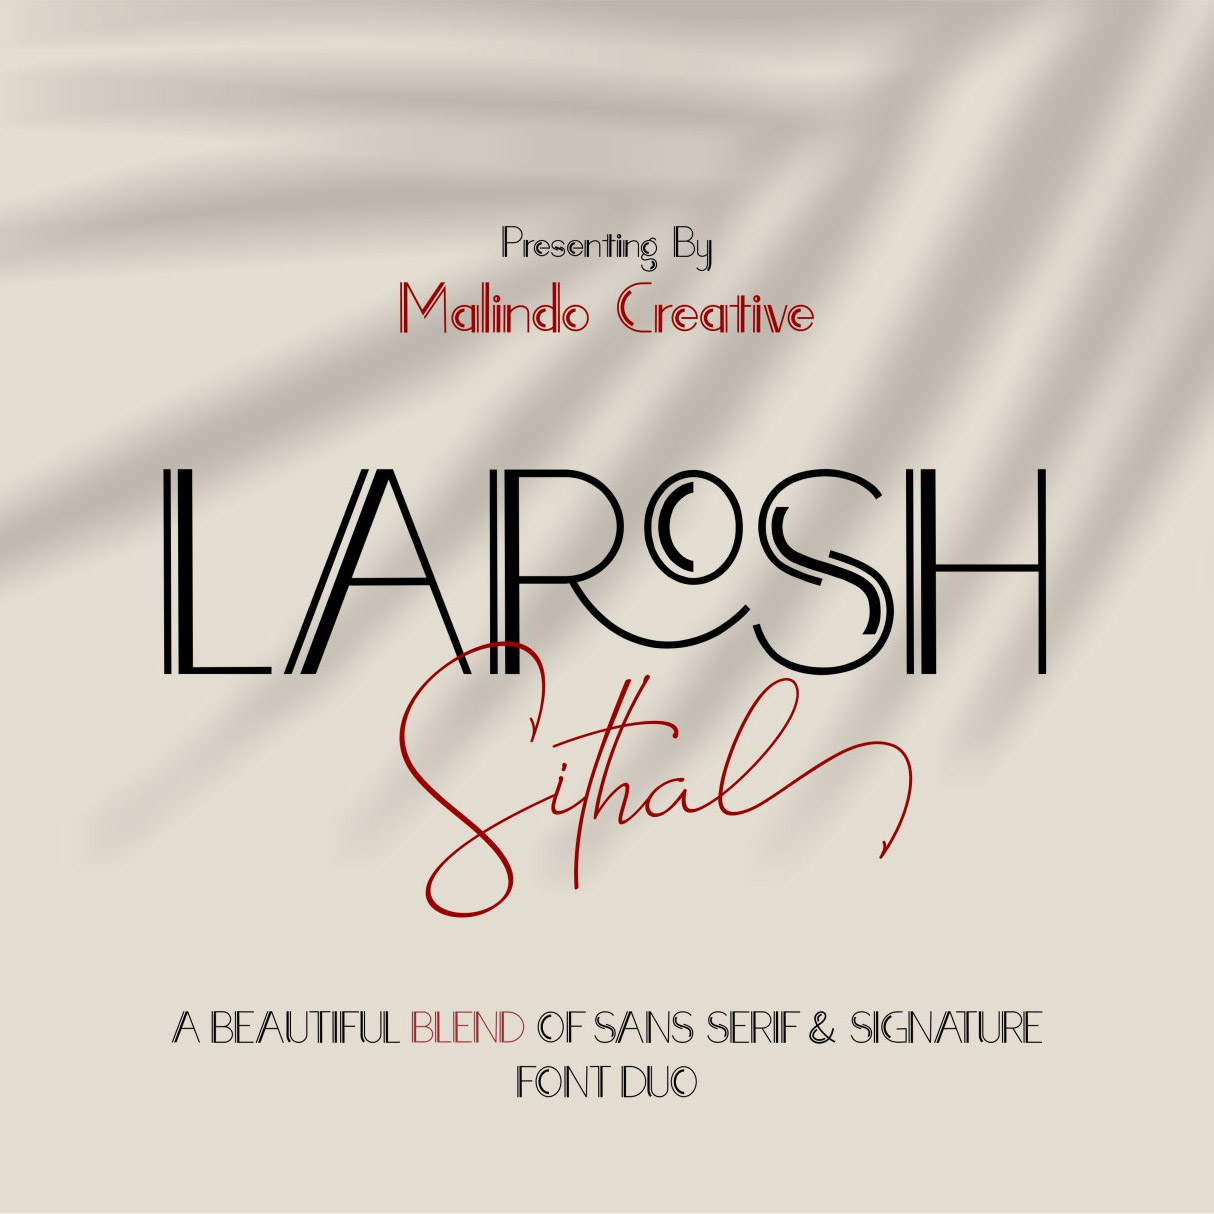 Hipster Script Fonts: LAROSH Sithal Duo + Extra – $10